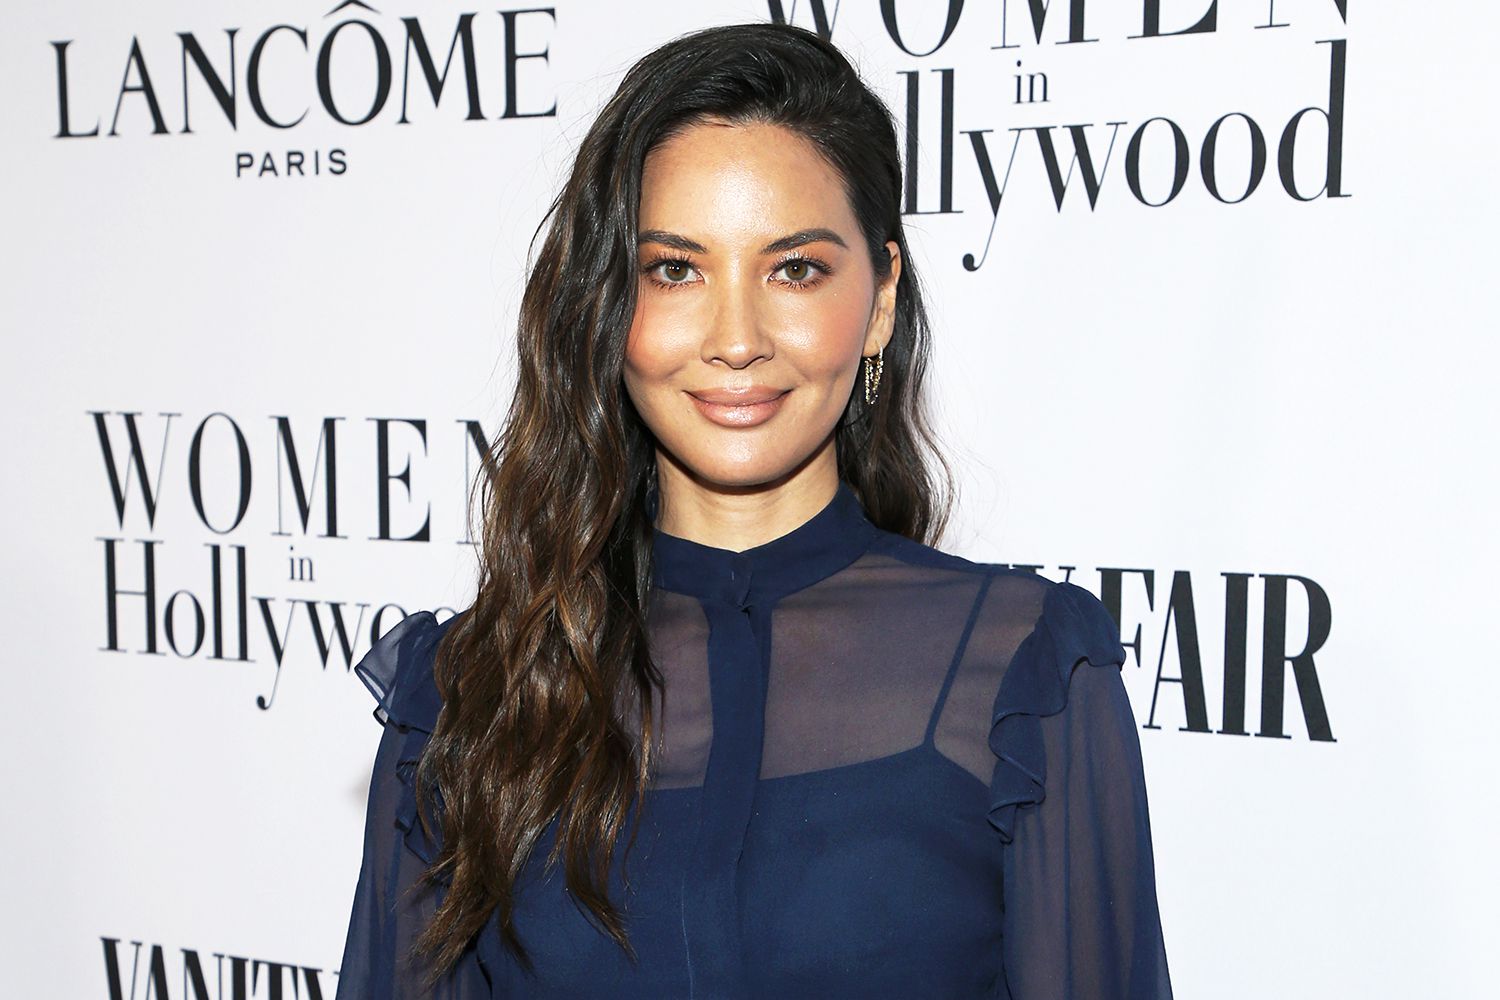 Olivia Munn Calls Racist Attack Against AAPI Webinar 'Cowardly' After Hacker 'Zoom Bombed' Meeting